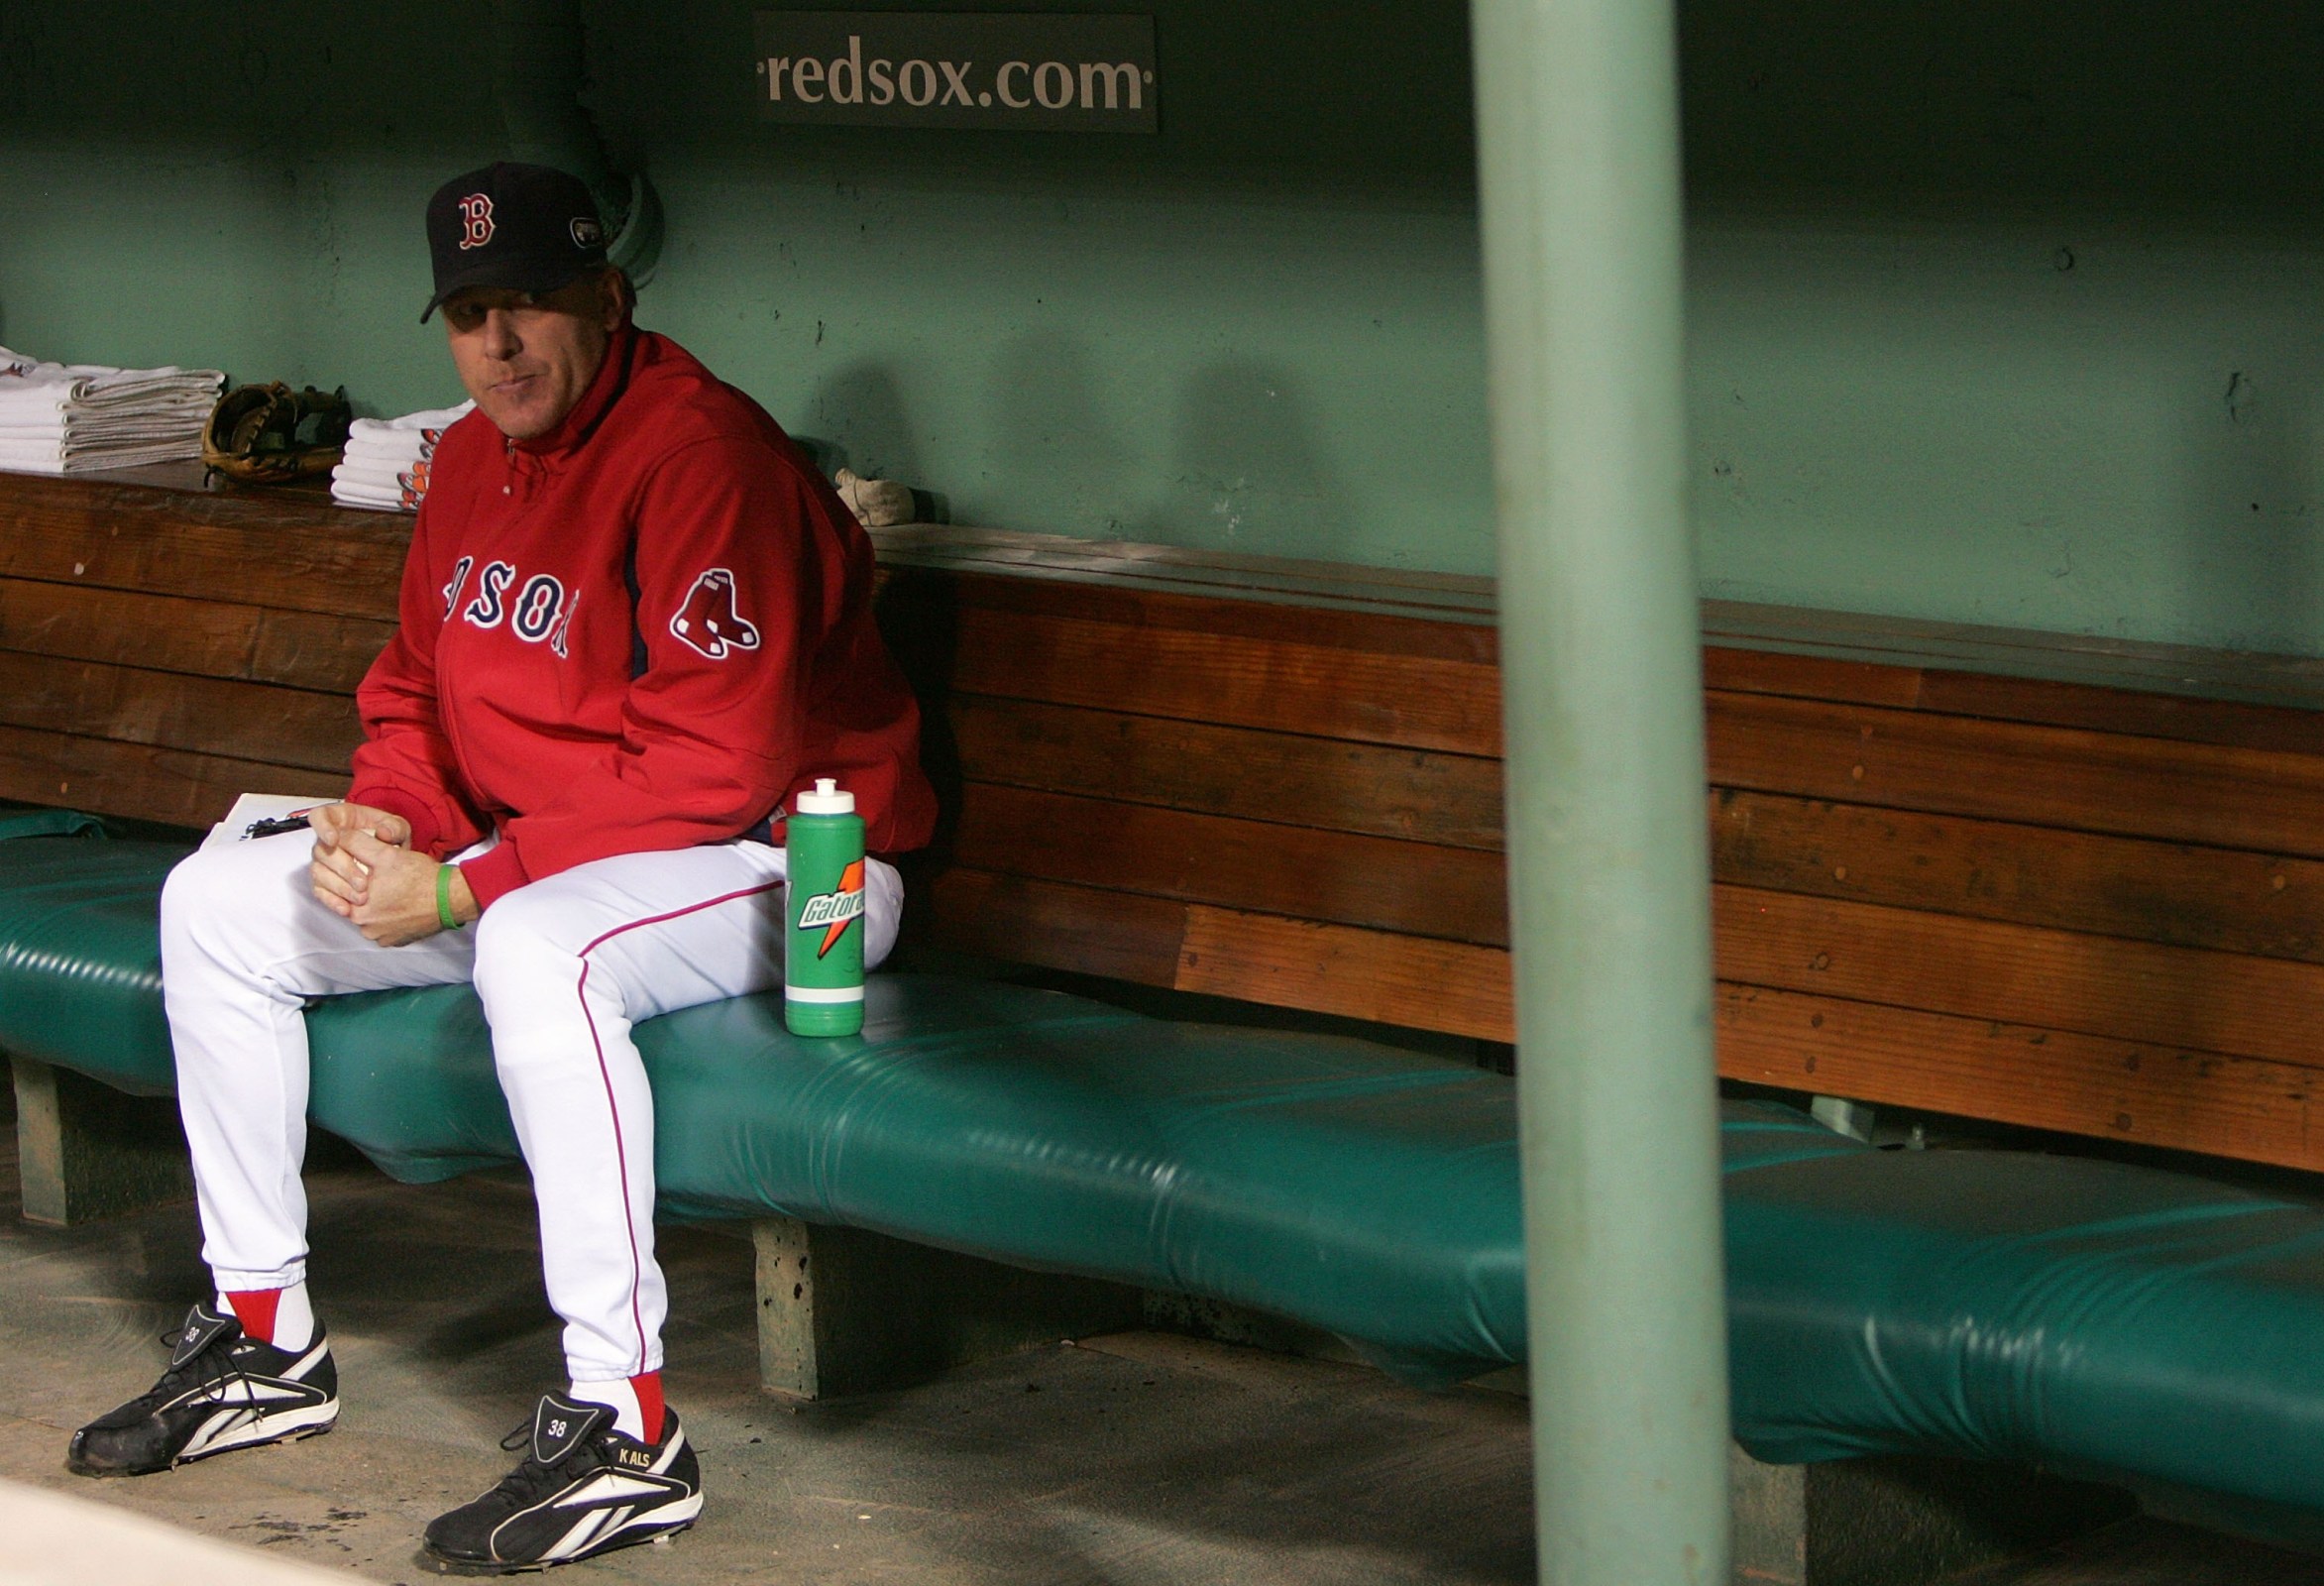 Curt Schilling sitting in the dugout while with the Red Sox, thinking about how much everyone else sucks.